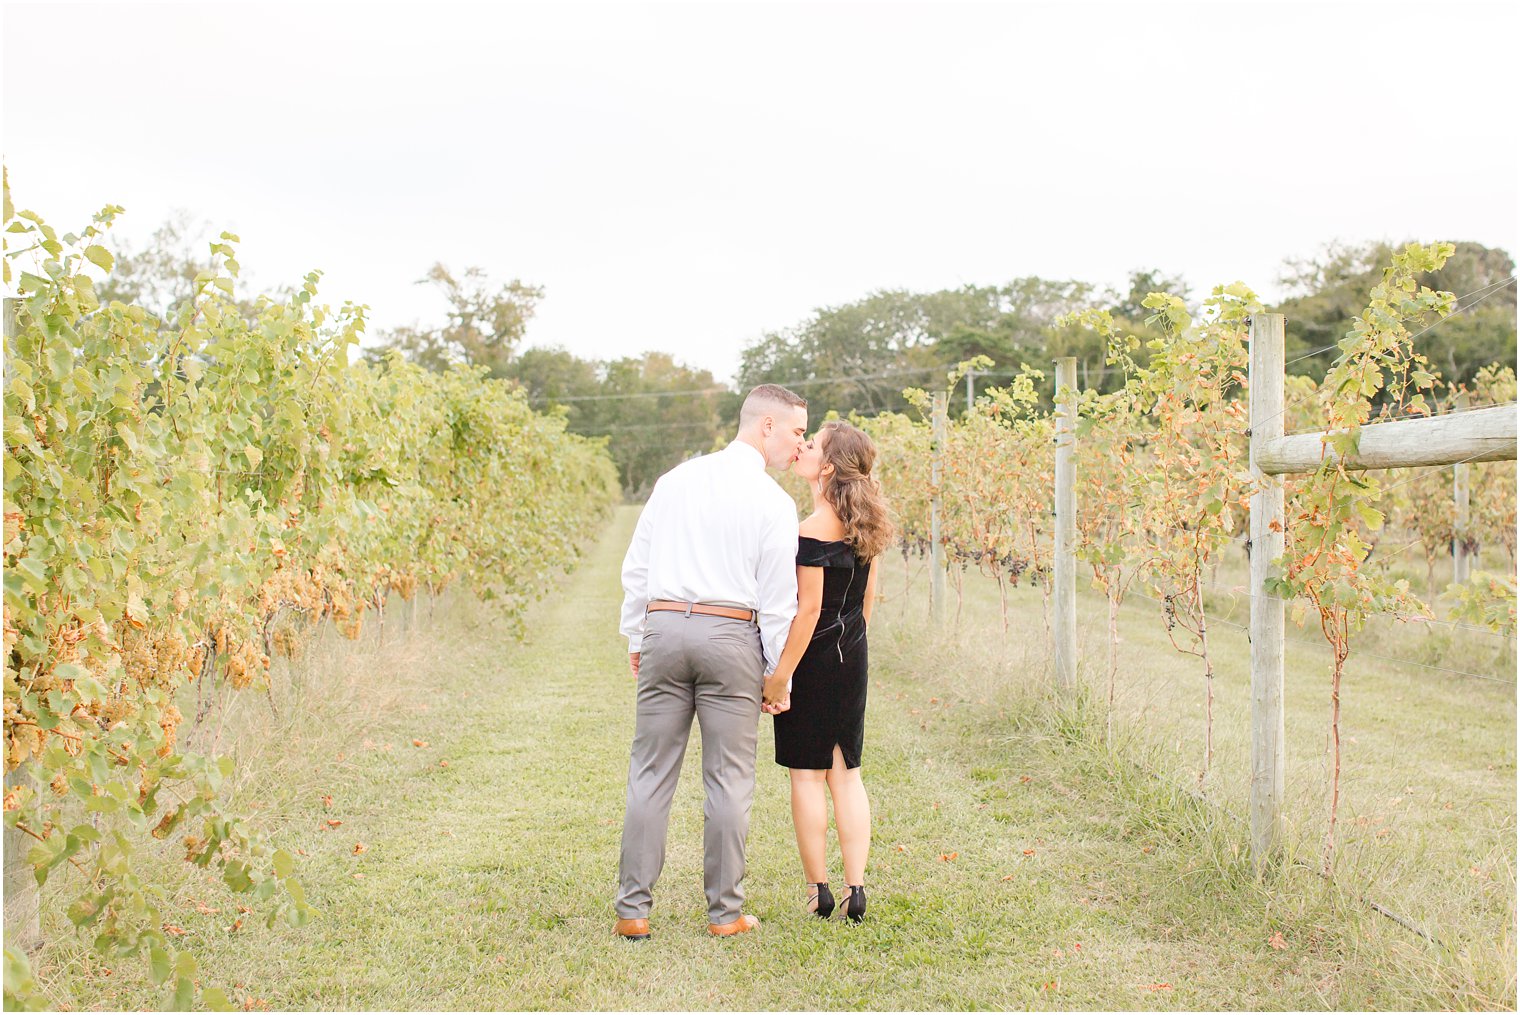 Engagement at Willow Creek Winery | Photos by Idalia Photography